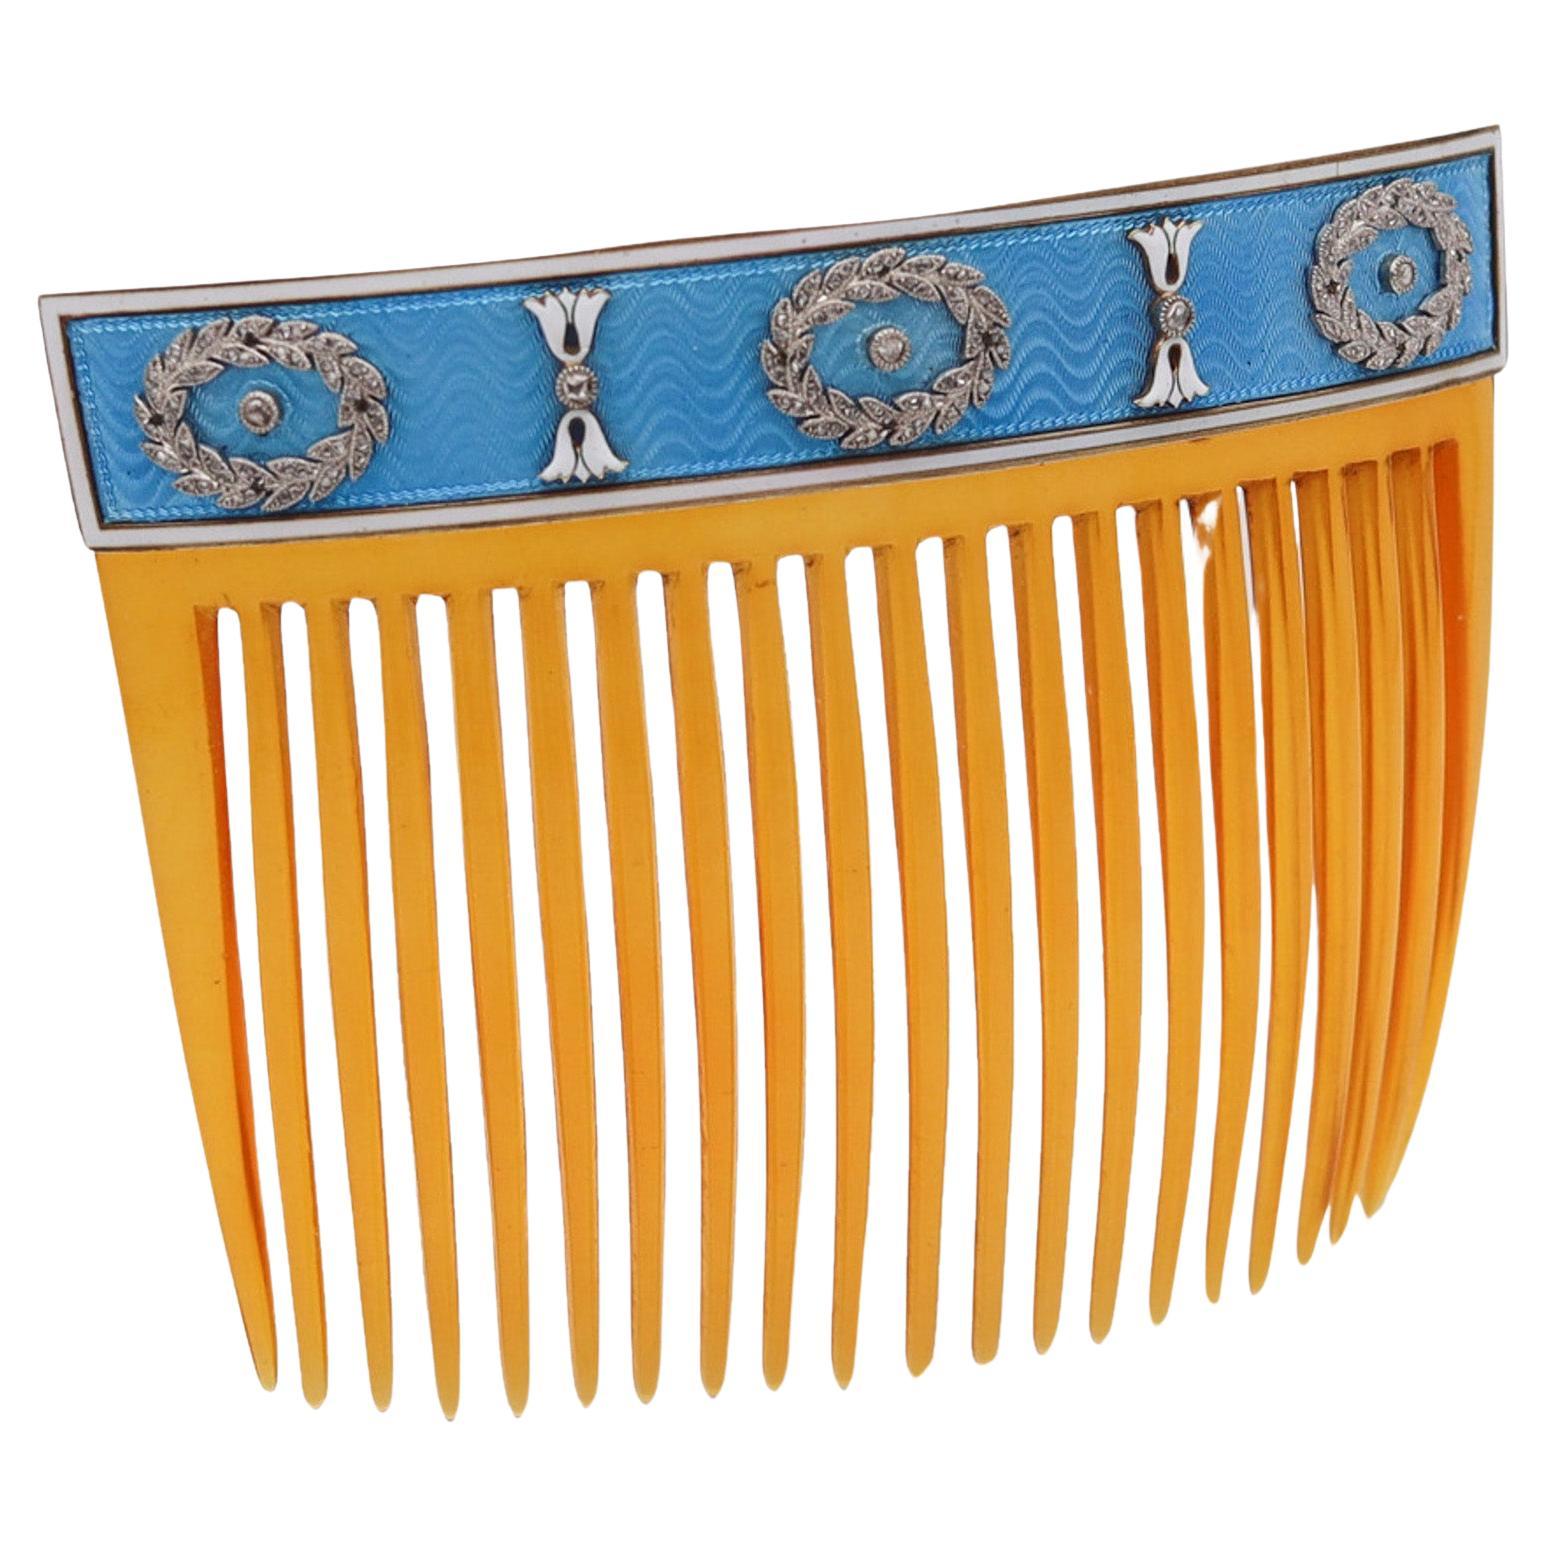 Cartier Paris 1900 Edwardian Enameled Hairs-Comb in 18Kt Gold With Diamonds